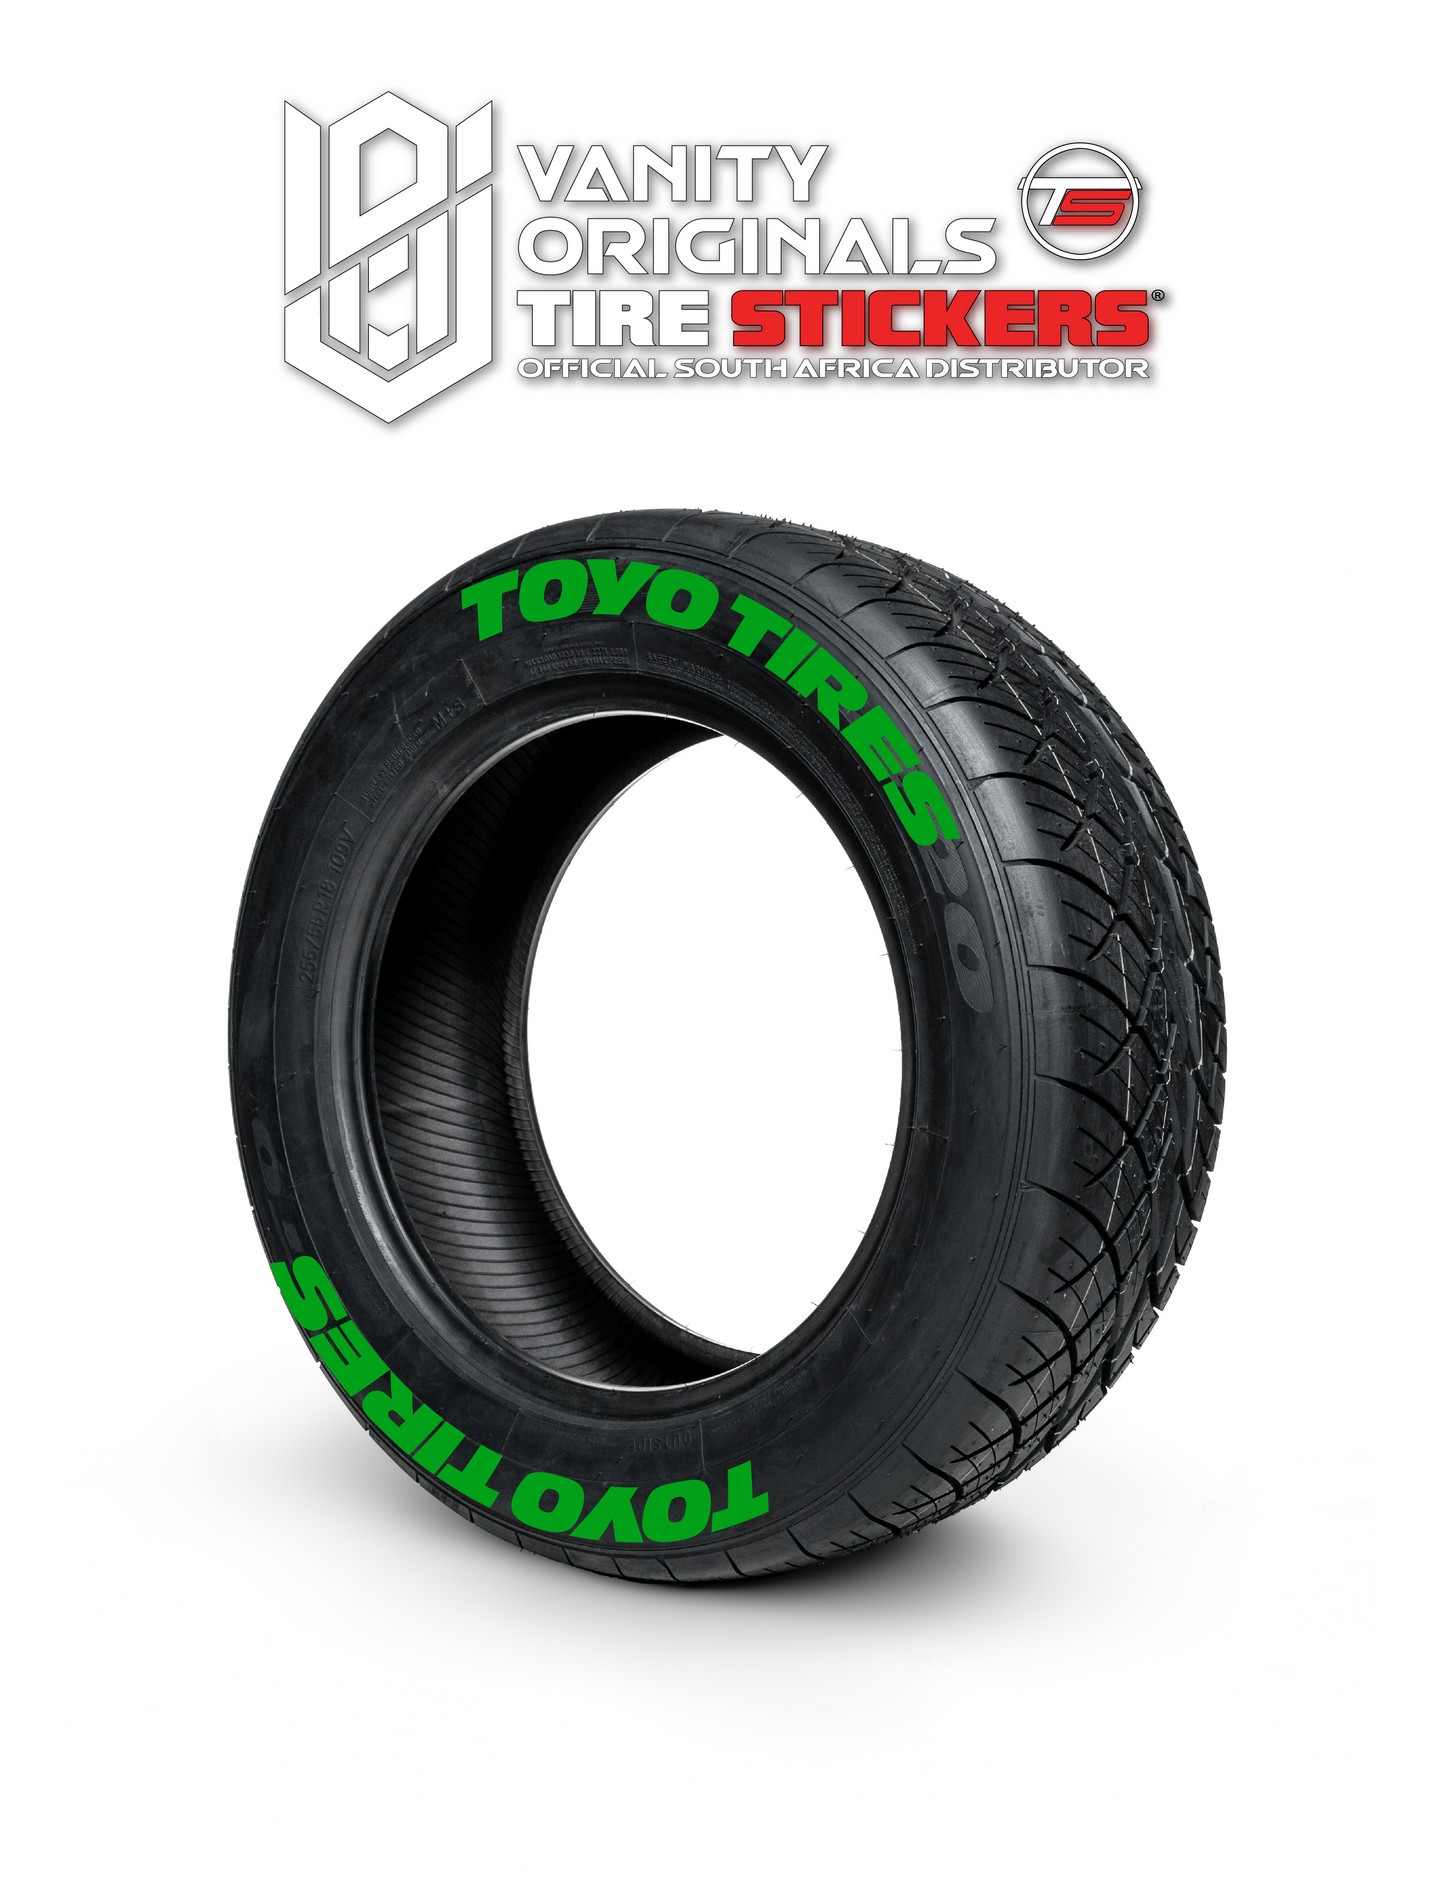 Toyo Tires ( 8x Rubber Decals, Adhesive & Instructions Included )